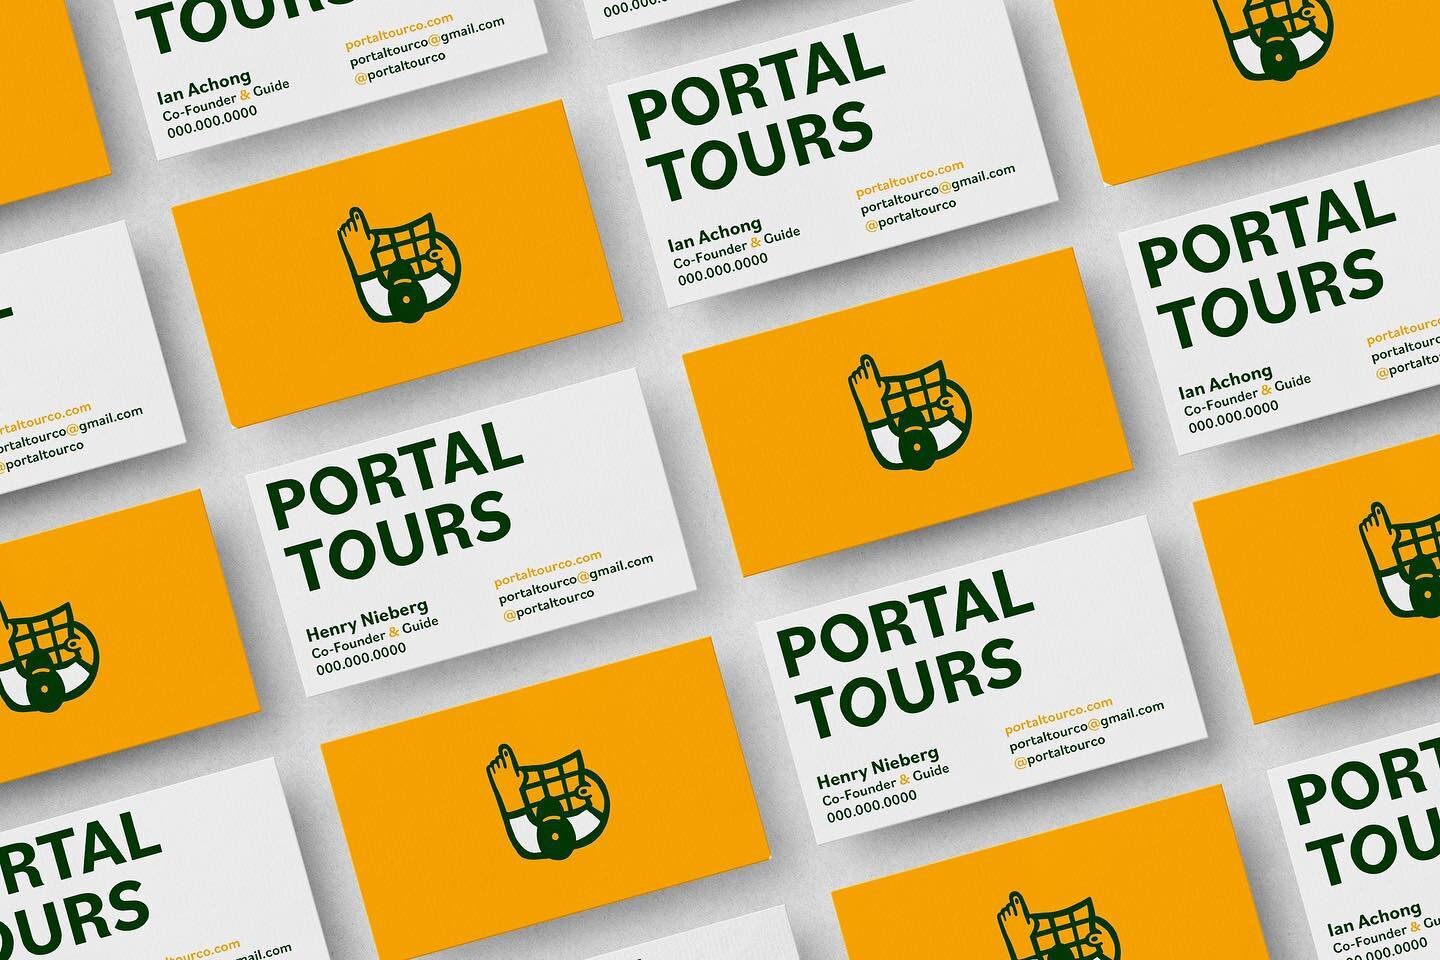 Little sneak peek of the identity I've created for my good friends over at @portaltourco . Go check them out if you're interested in learning all things human geography, history, and urbanism in the lovely windy city of Chicago. More to come on this 